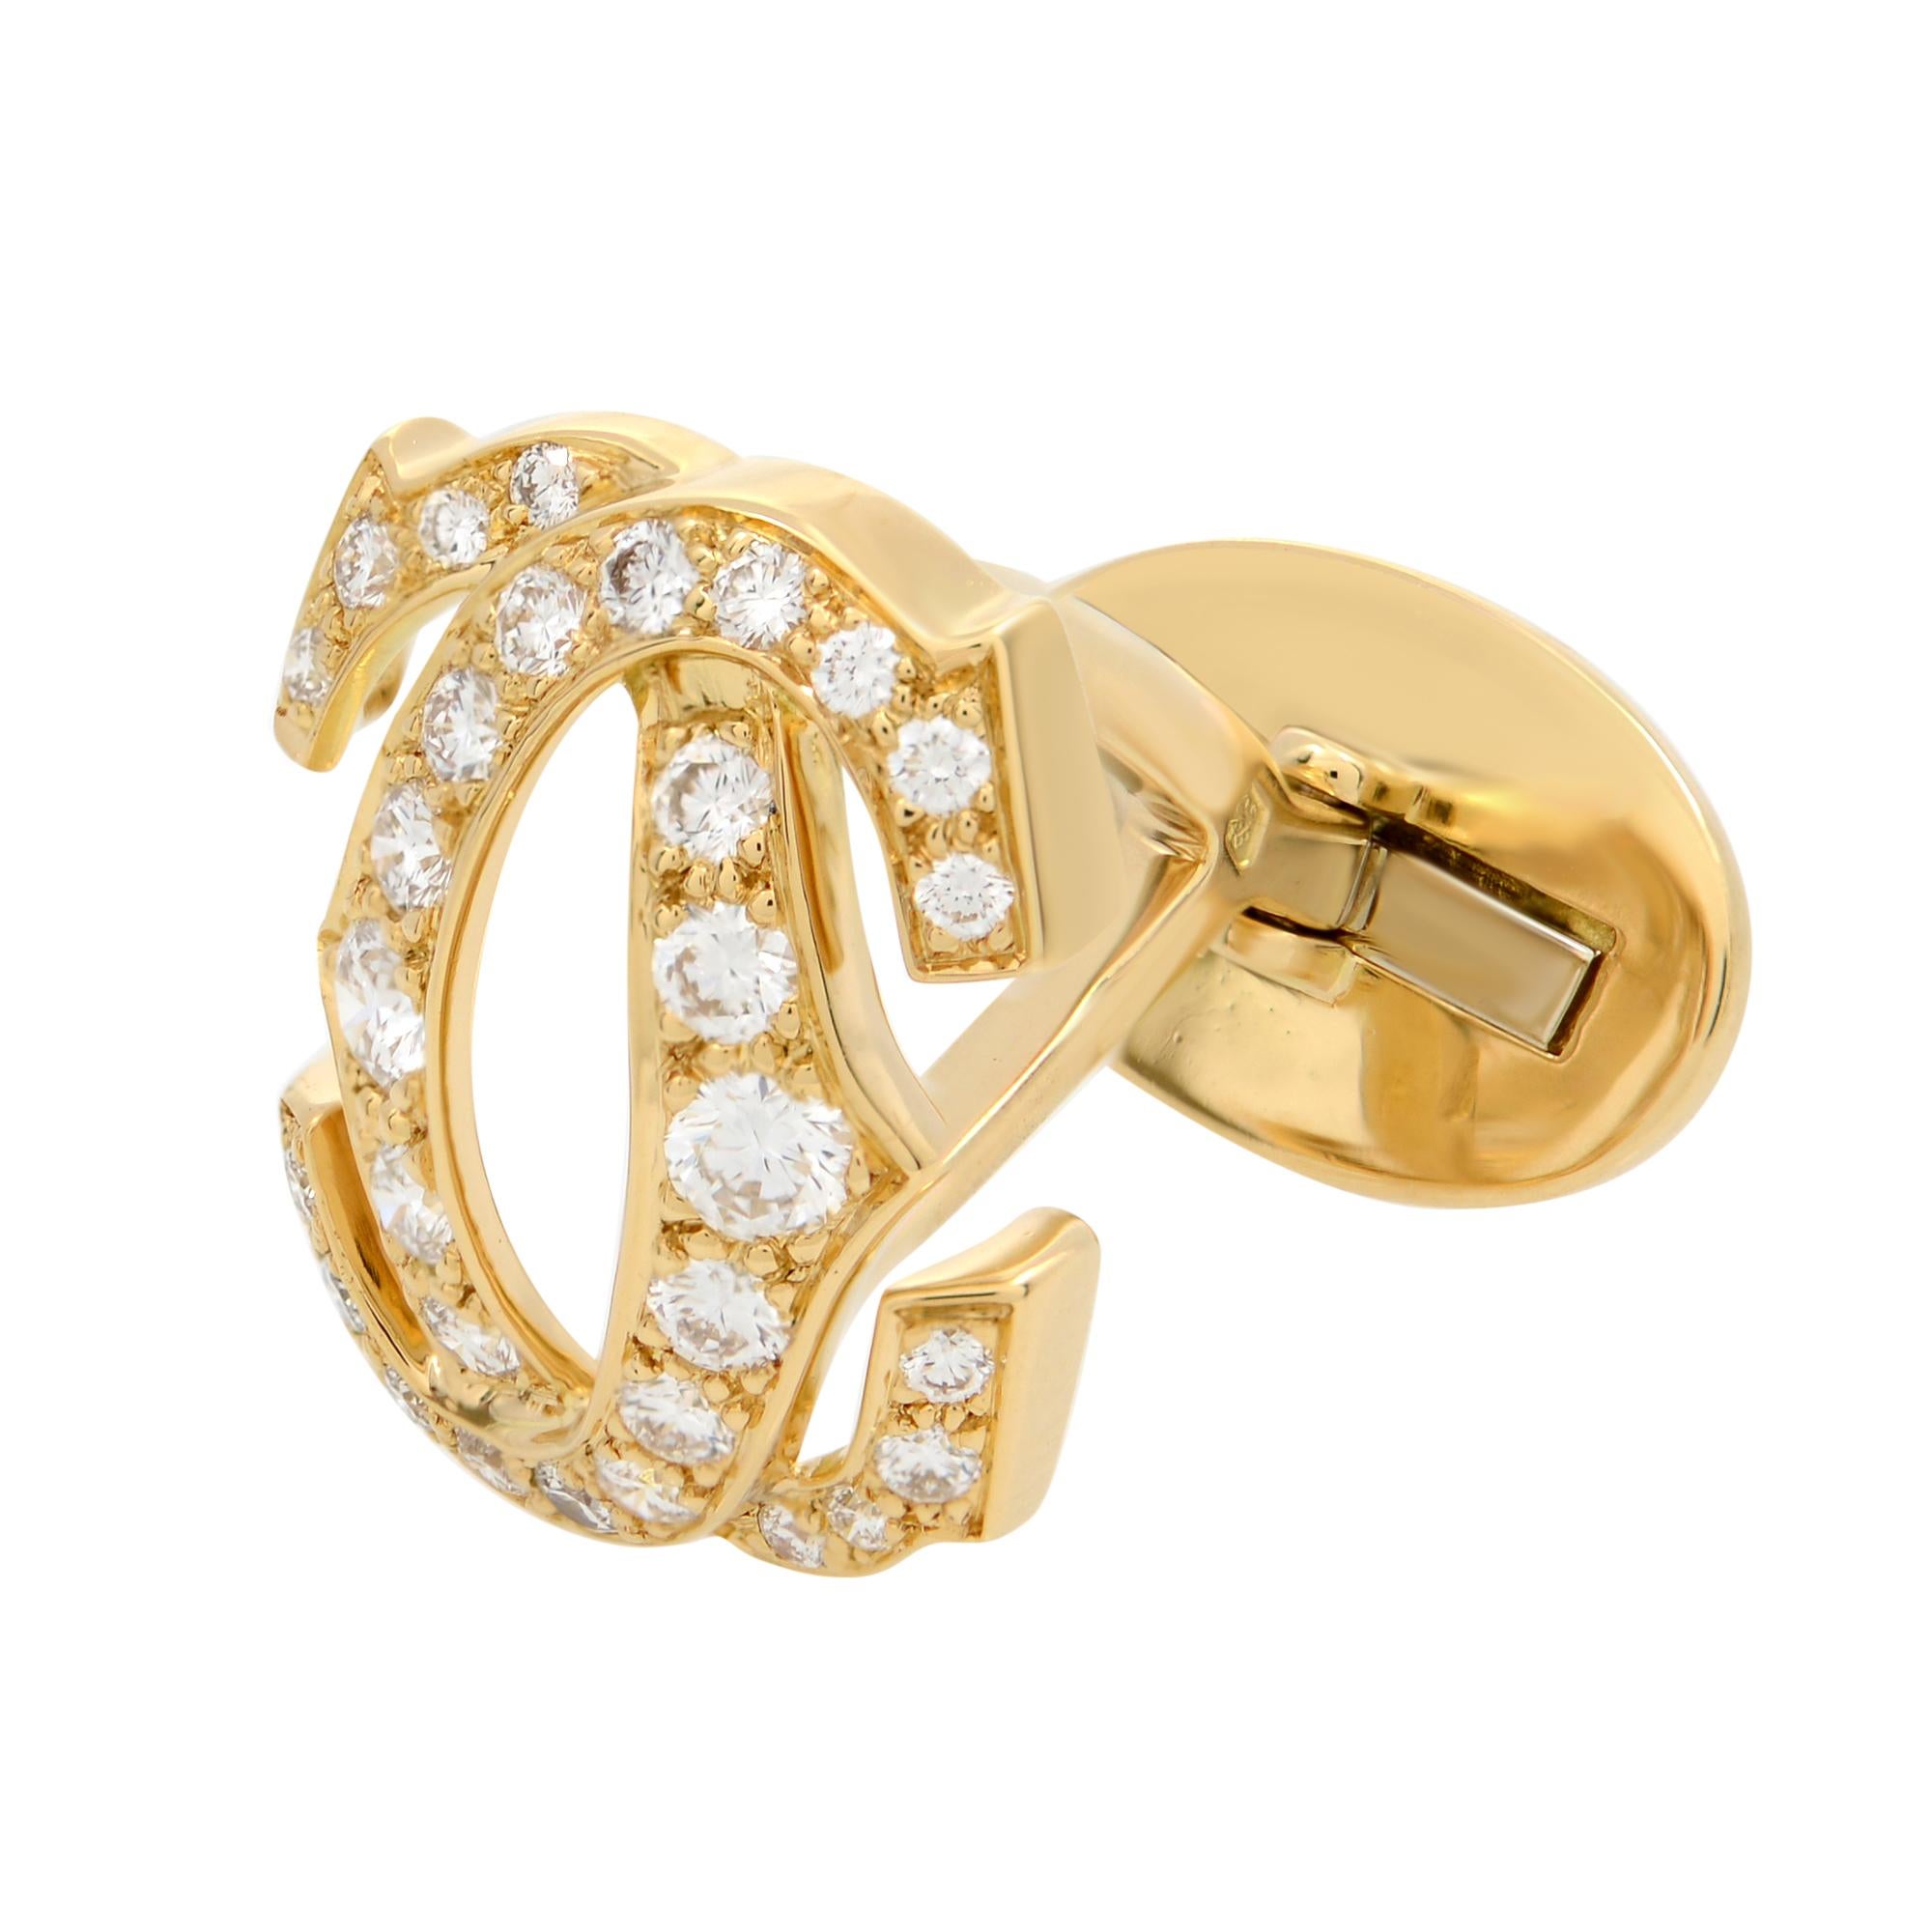 Cartier Diamond 18k Yellow Gold CC Penelope Cufflinks. Classic and famous interlocking CC motifs that are the symbol of the famous French jeweler Cartier for over 170 years. The cufflinks are set with 60 diamonds, approximately 1.50 cttw of fine,